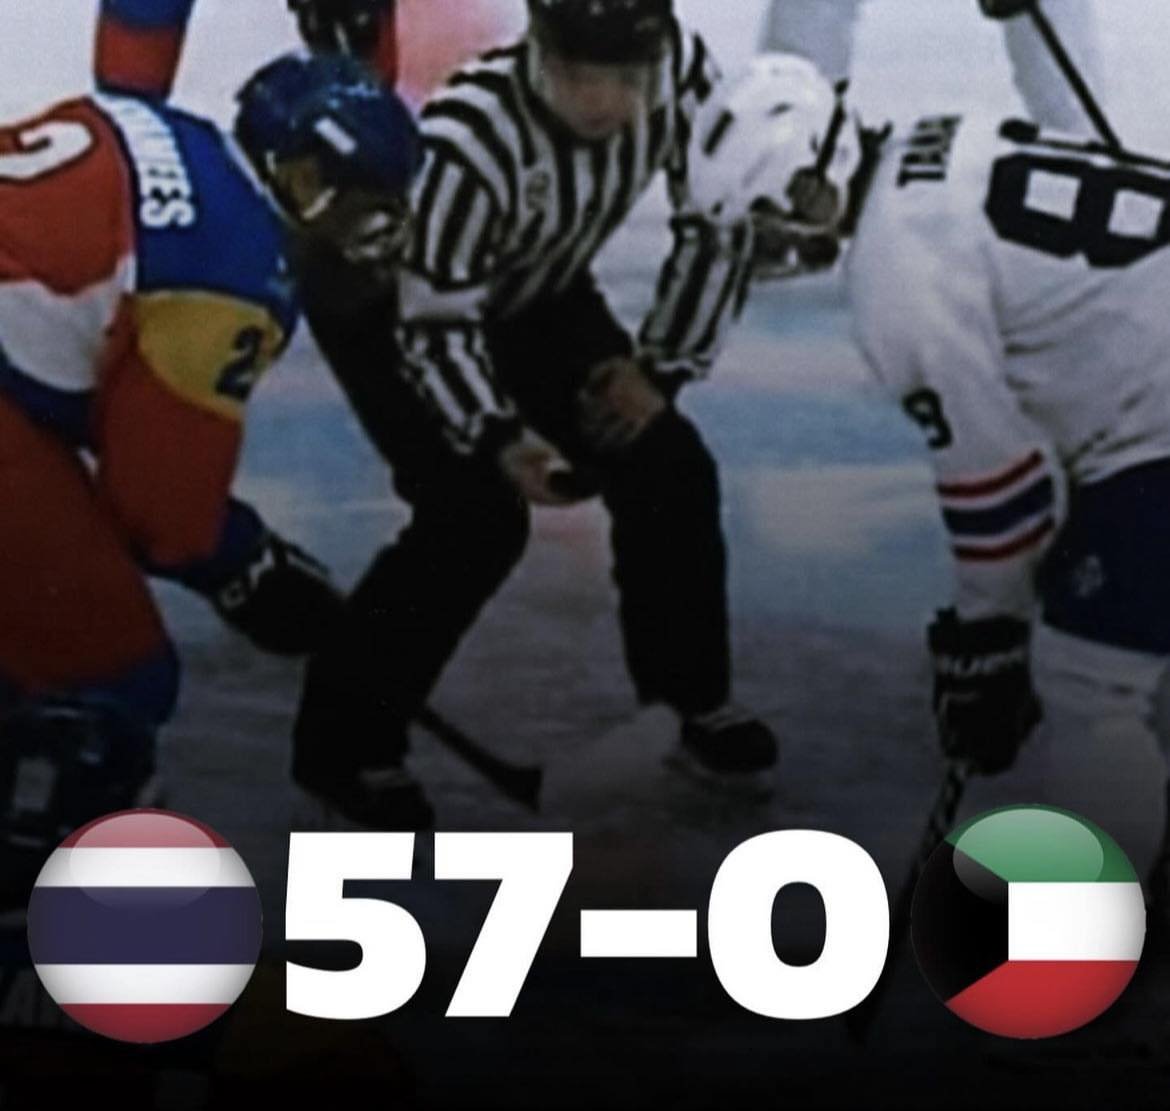 LOL 'Thailand just recorded the sixth-biggest blowout in international ice hockey history, with a 57-0 victory of Kuwait'